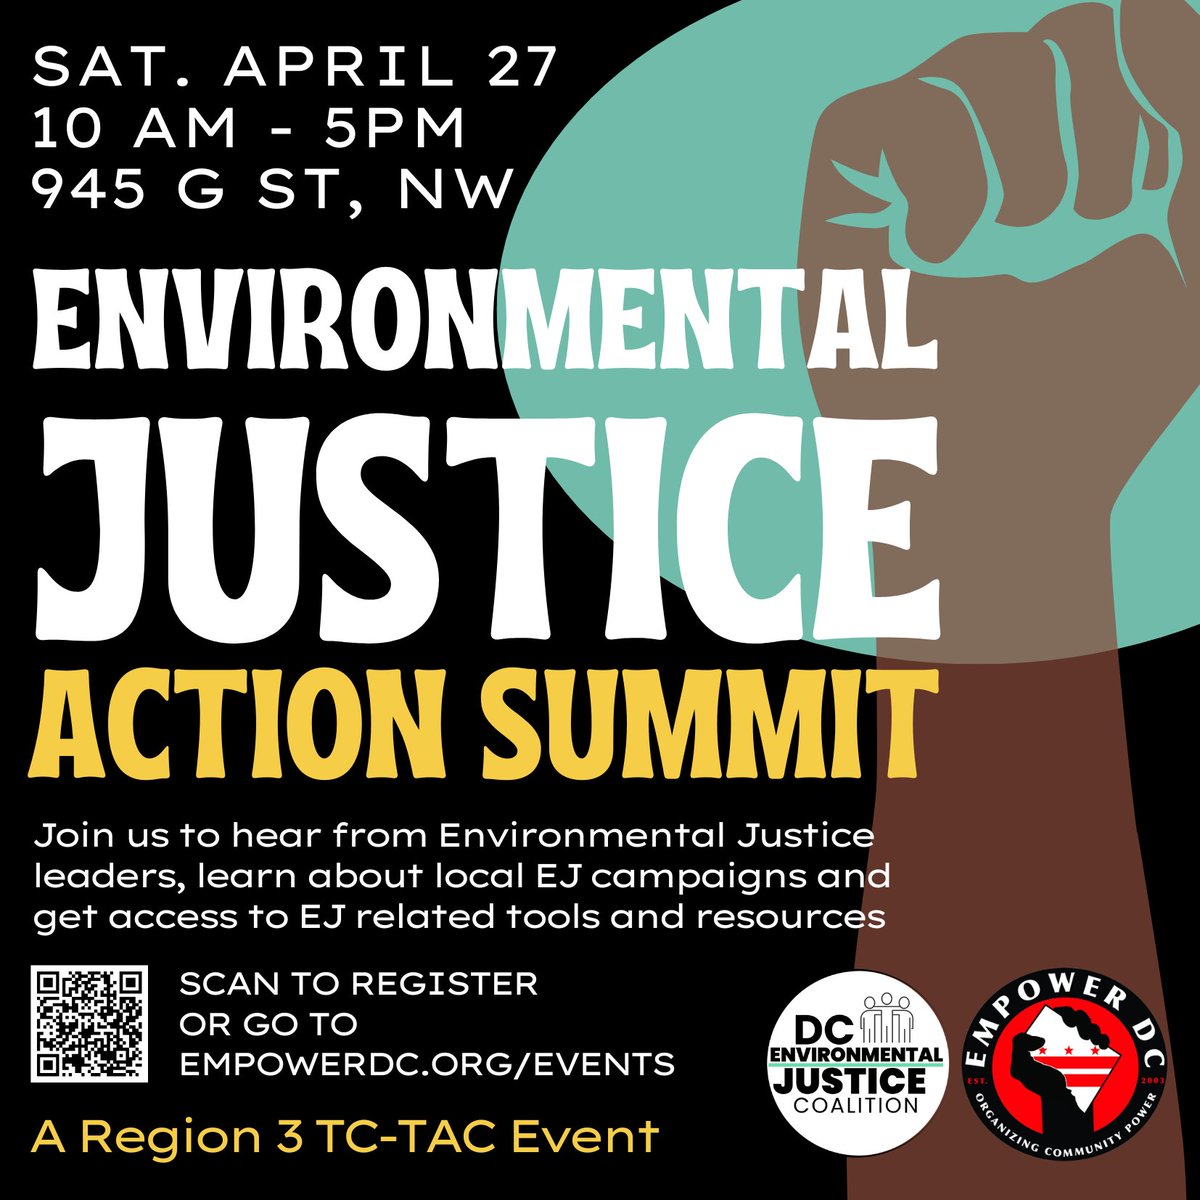 Join us this Saturday, April 27th for the first annual Environmental Justice Action Summit! Learn from EJ movement leaders, local community leaders and subject matter experts. Join and build the local EJ Movement! Lunch provided. Register at empowerdc.org/events